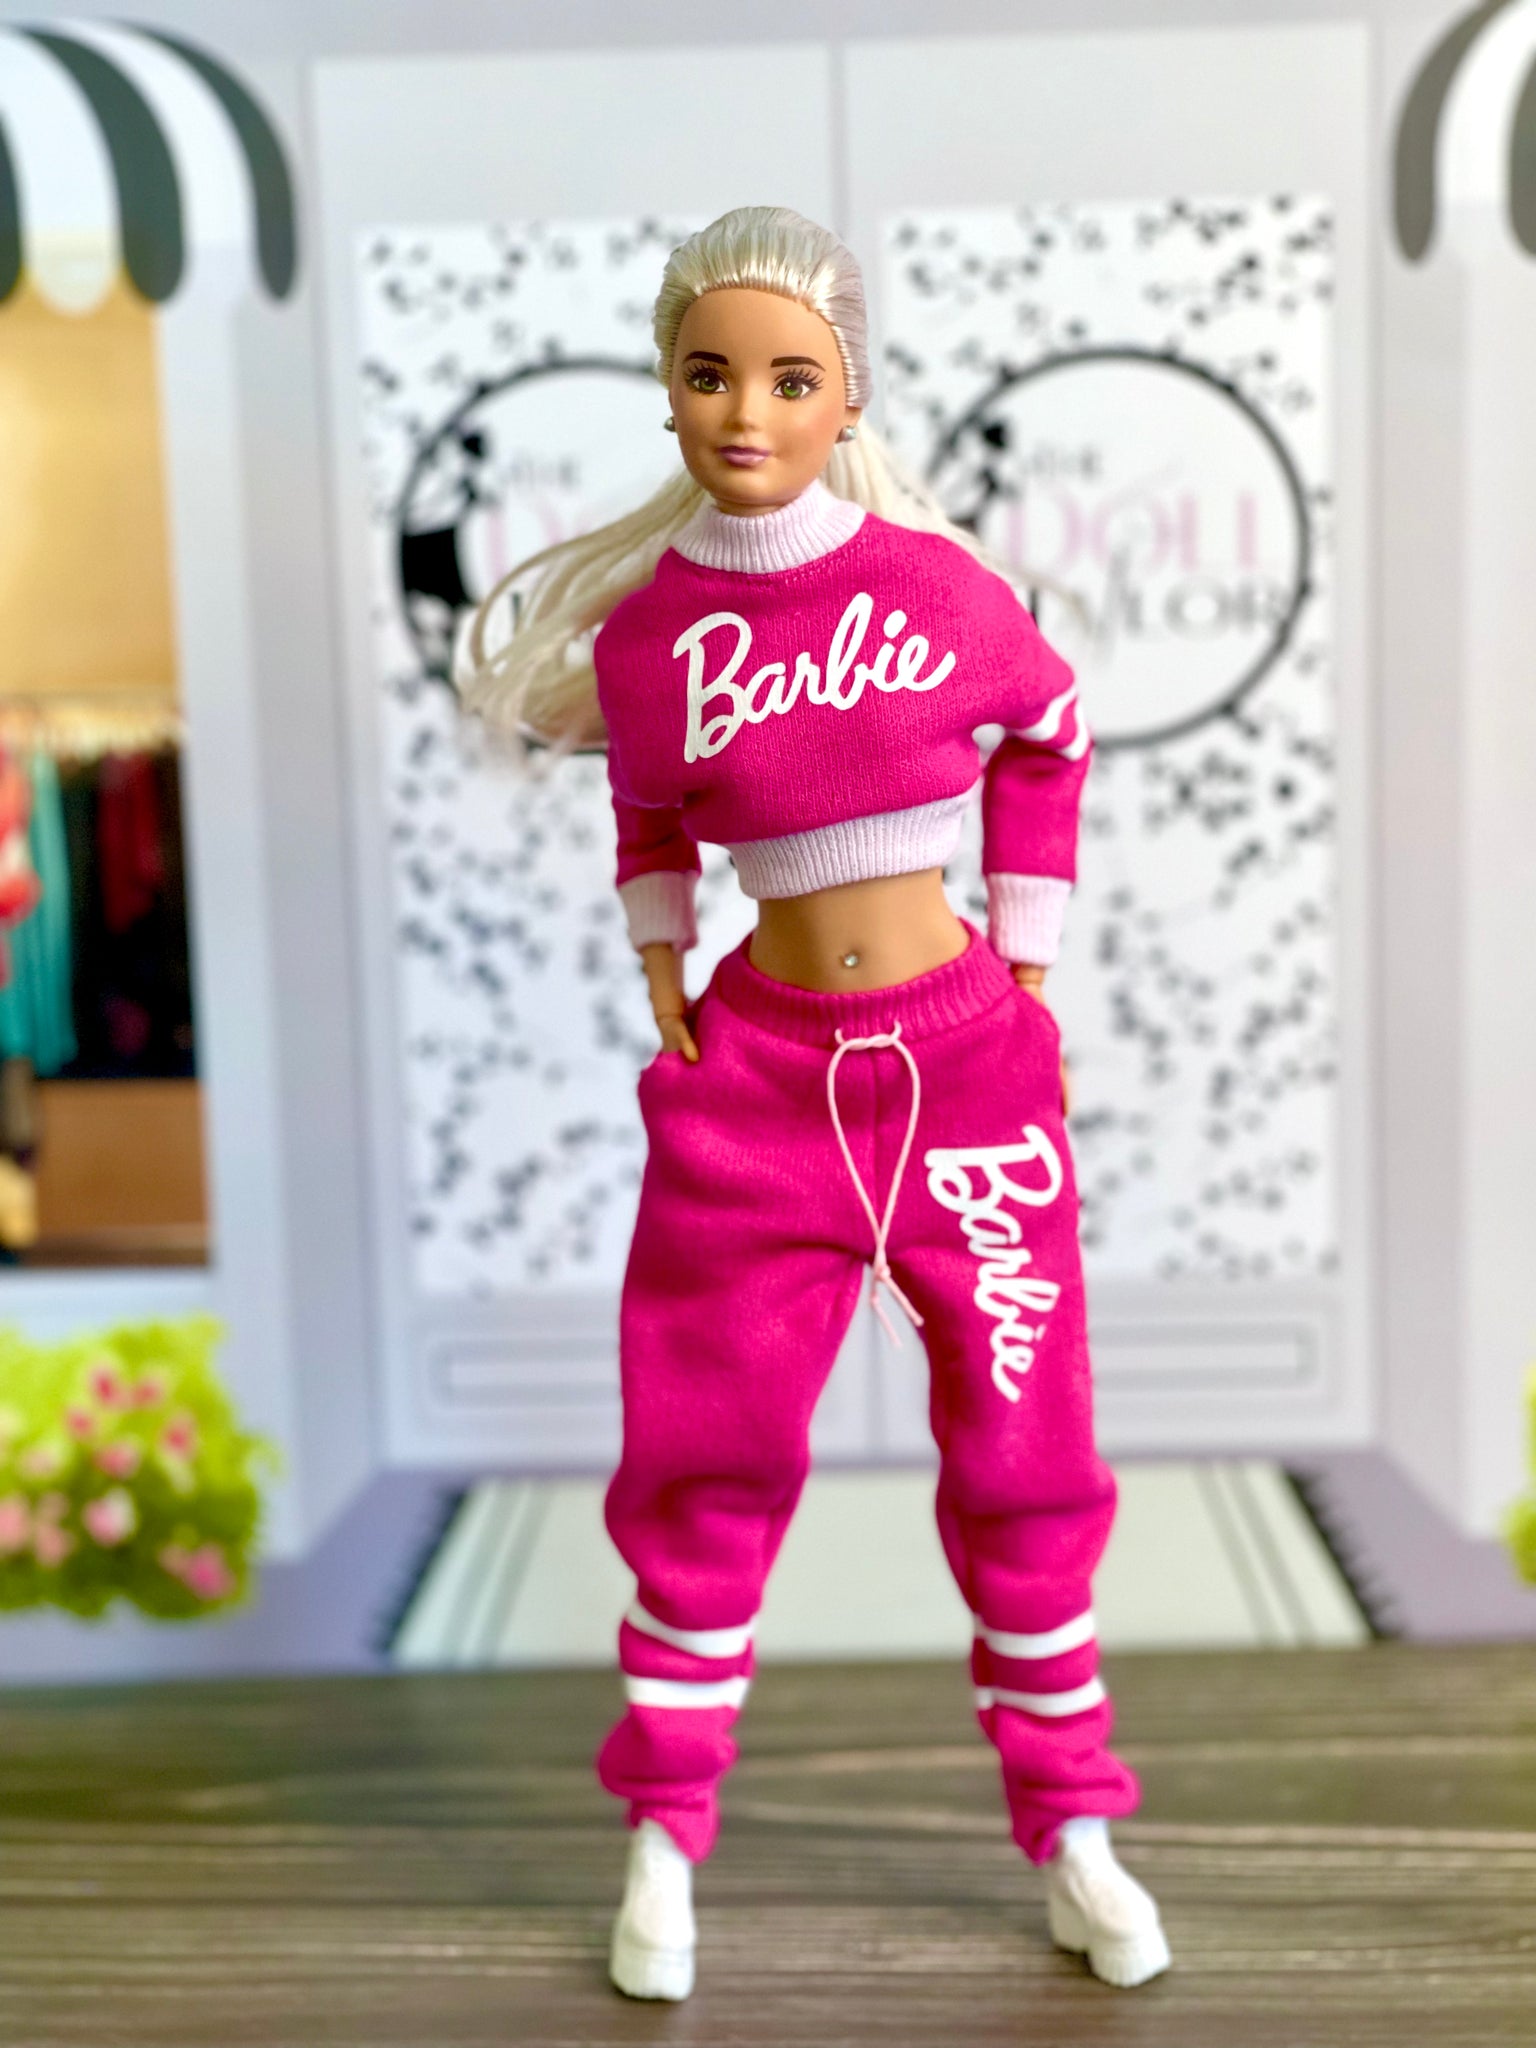 Pink sweatpants and sweatshirt for Barbie doll with logo – The